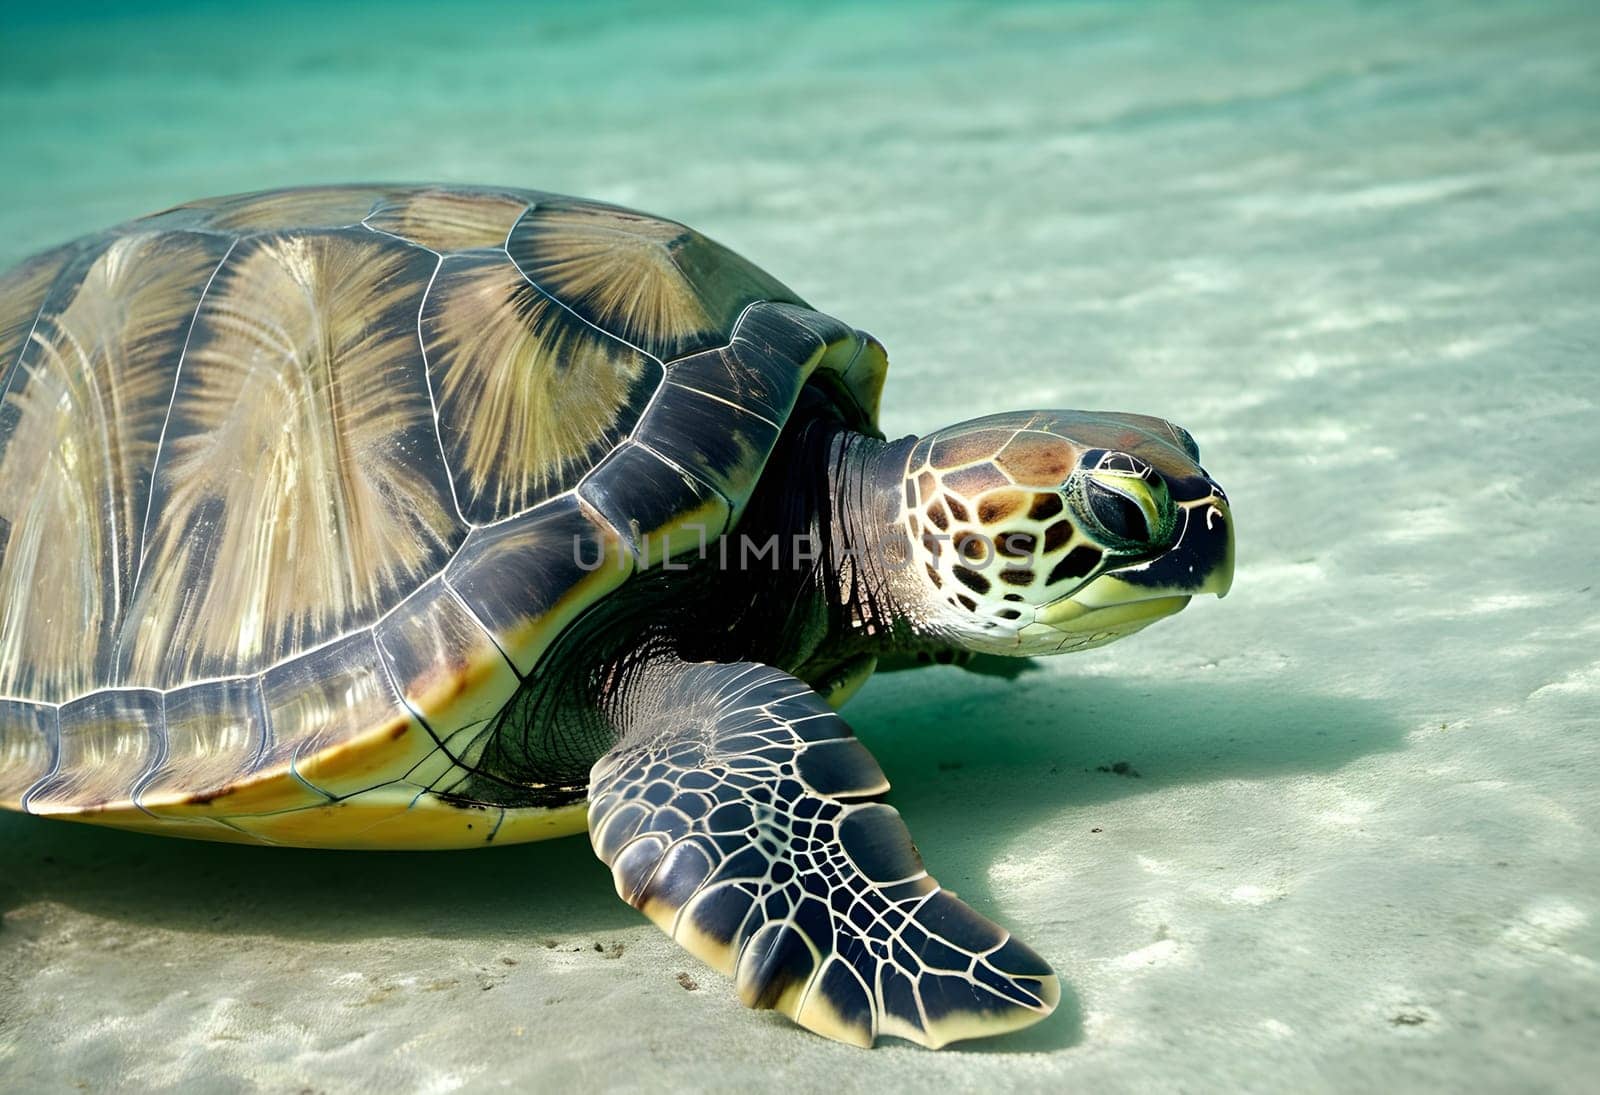 Aquatic Wonders: Discovering the Diversity of Turtle Life